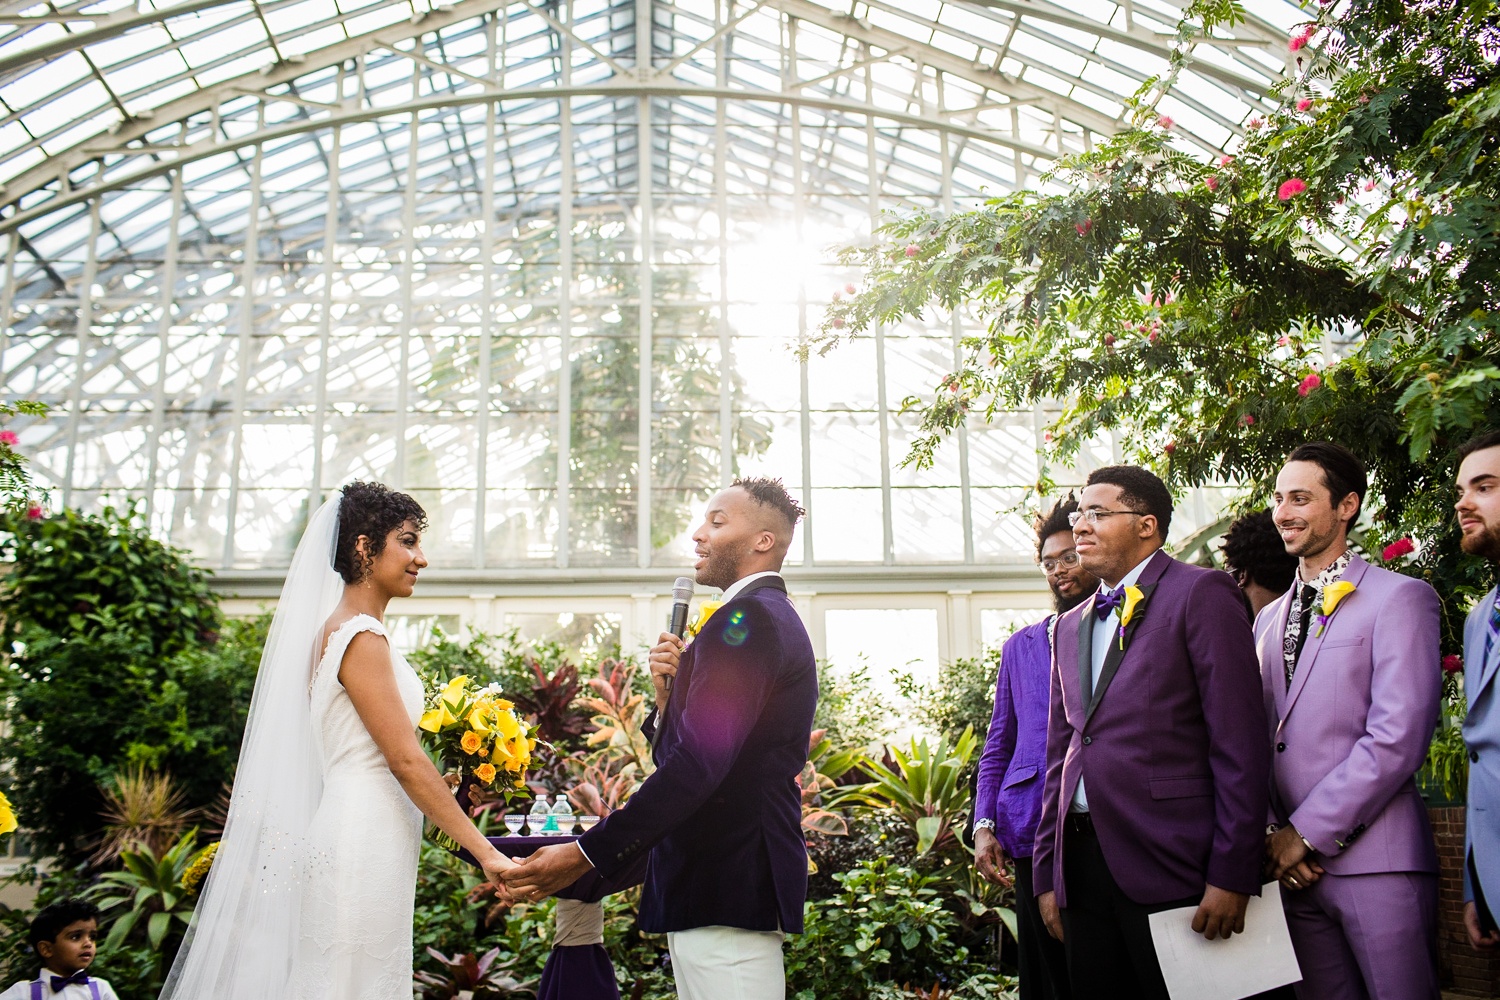 A groom sings a song to his bride during a Garfield Park Conservatory wedding.